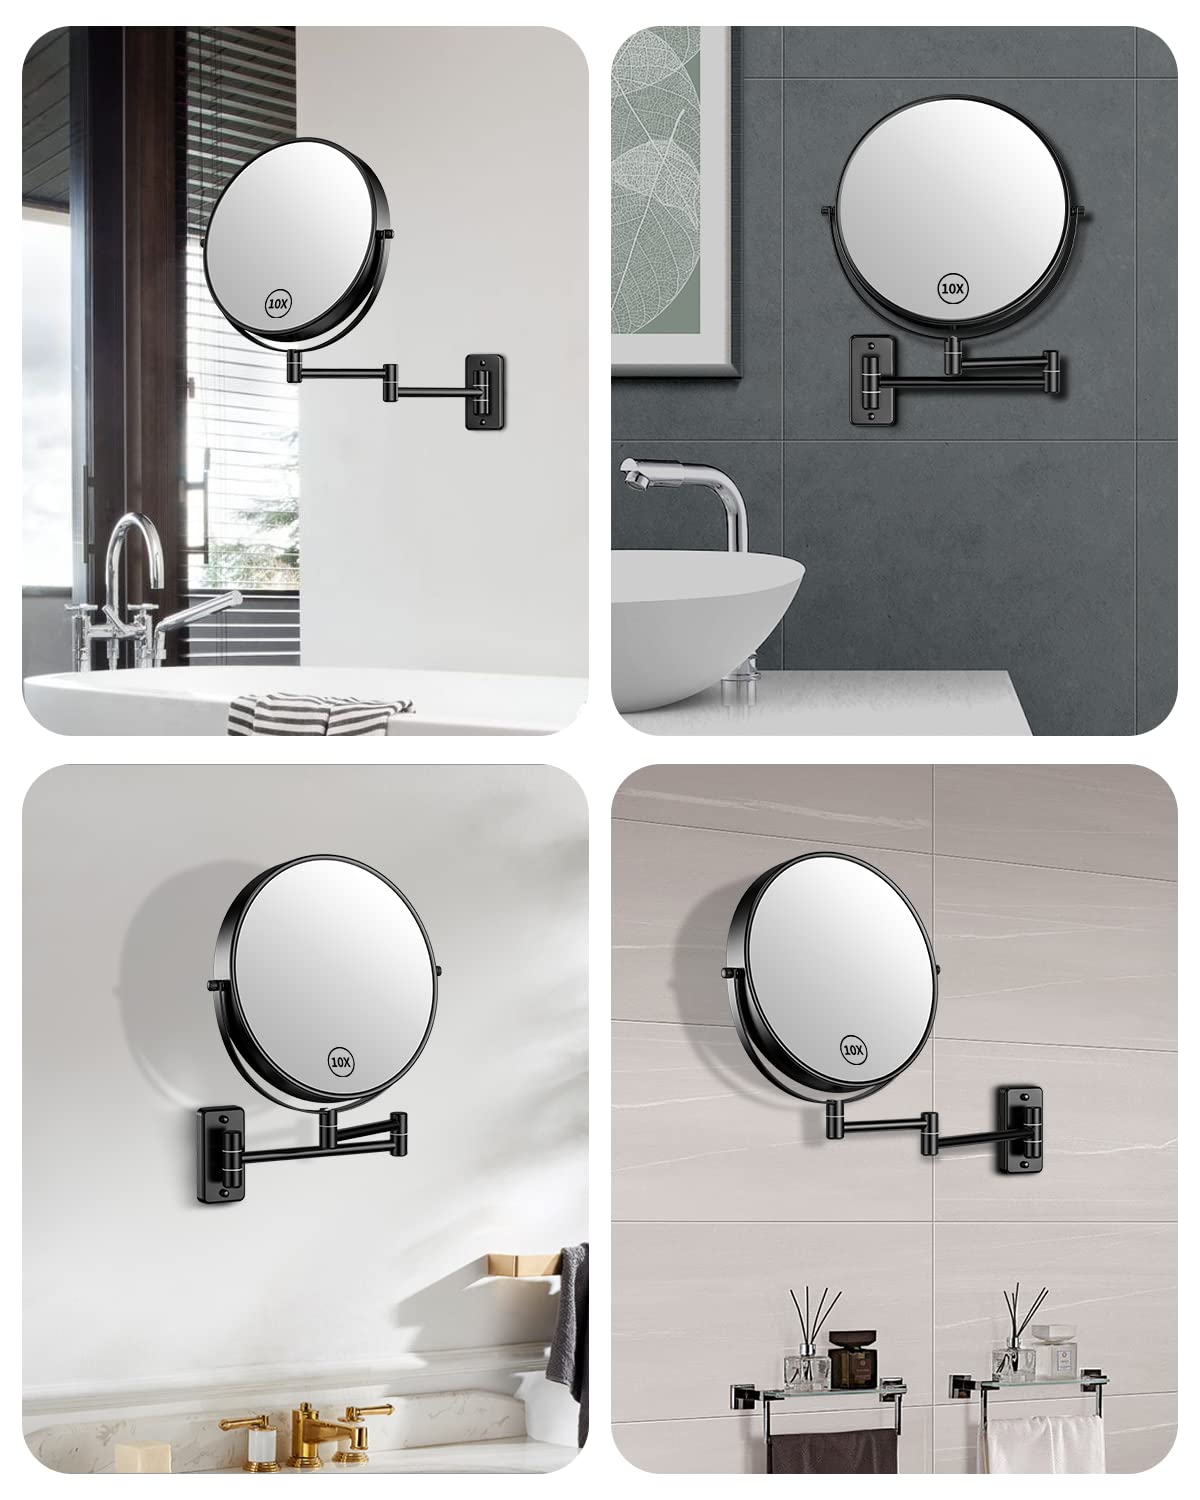 Gospire 9" Large Size Wall Mount Makeup Mirror with 1X/10X Magnification Double-Sided 360° Swivel Vanity Mirror，Black Polished Extendable Shaving Bathroom Wall Cosmetic Mirror for Men and Women